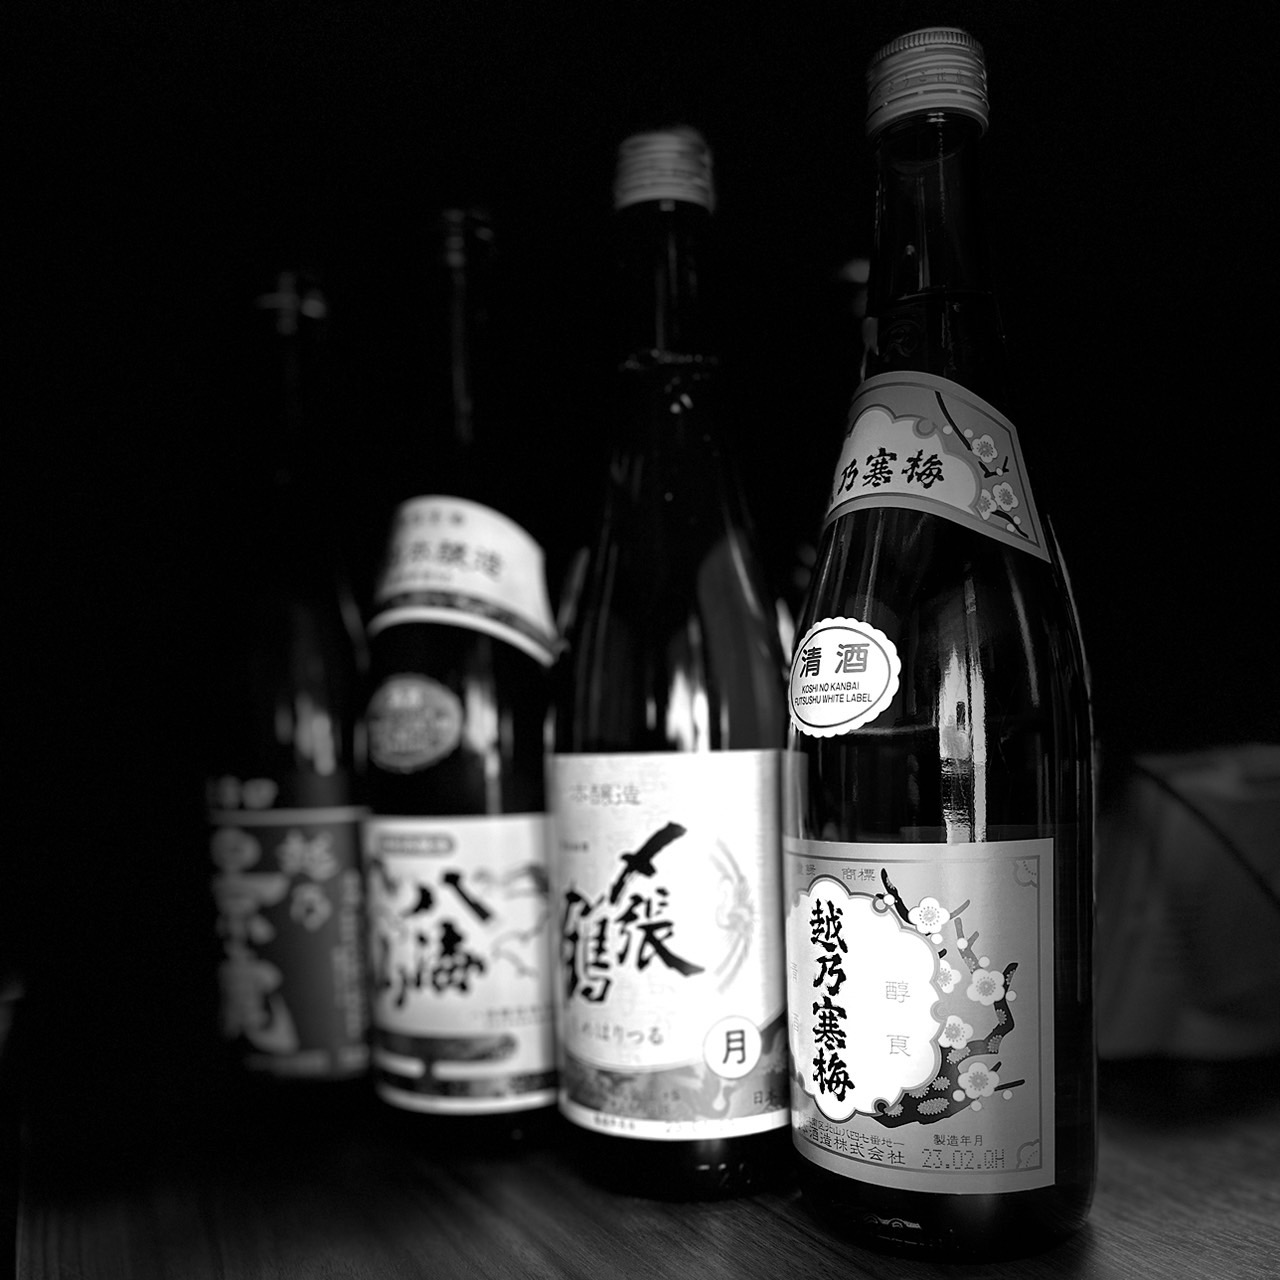 Types and explanations of Japanese liquor called rice wine